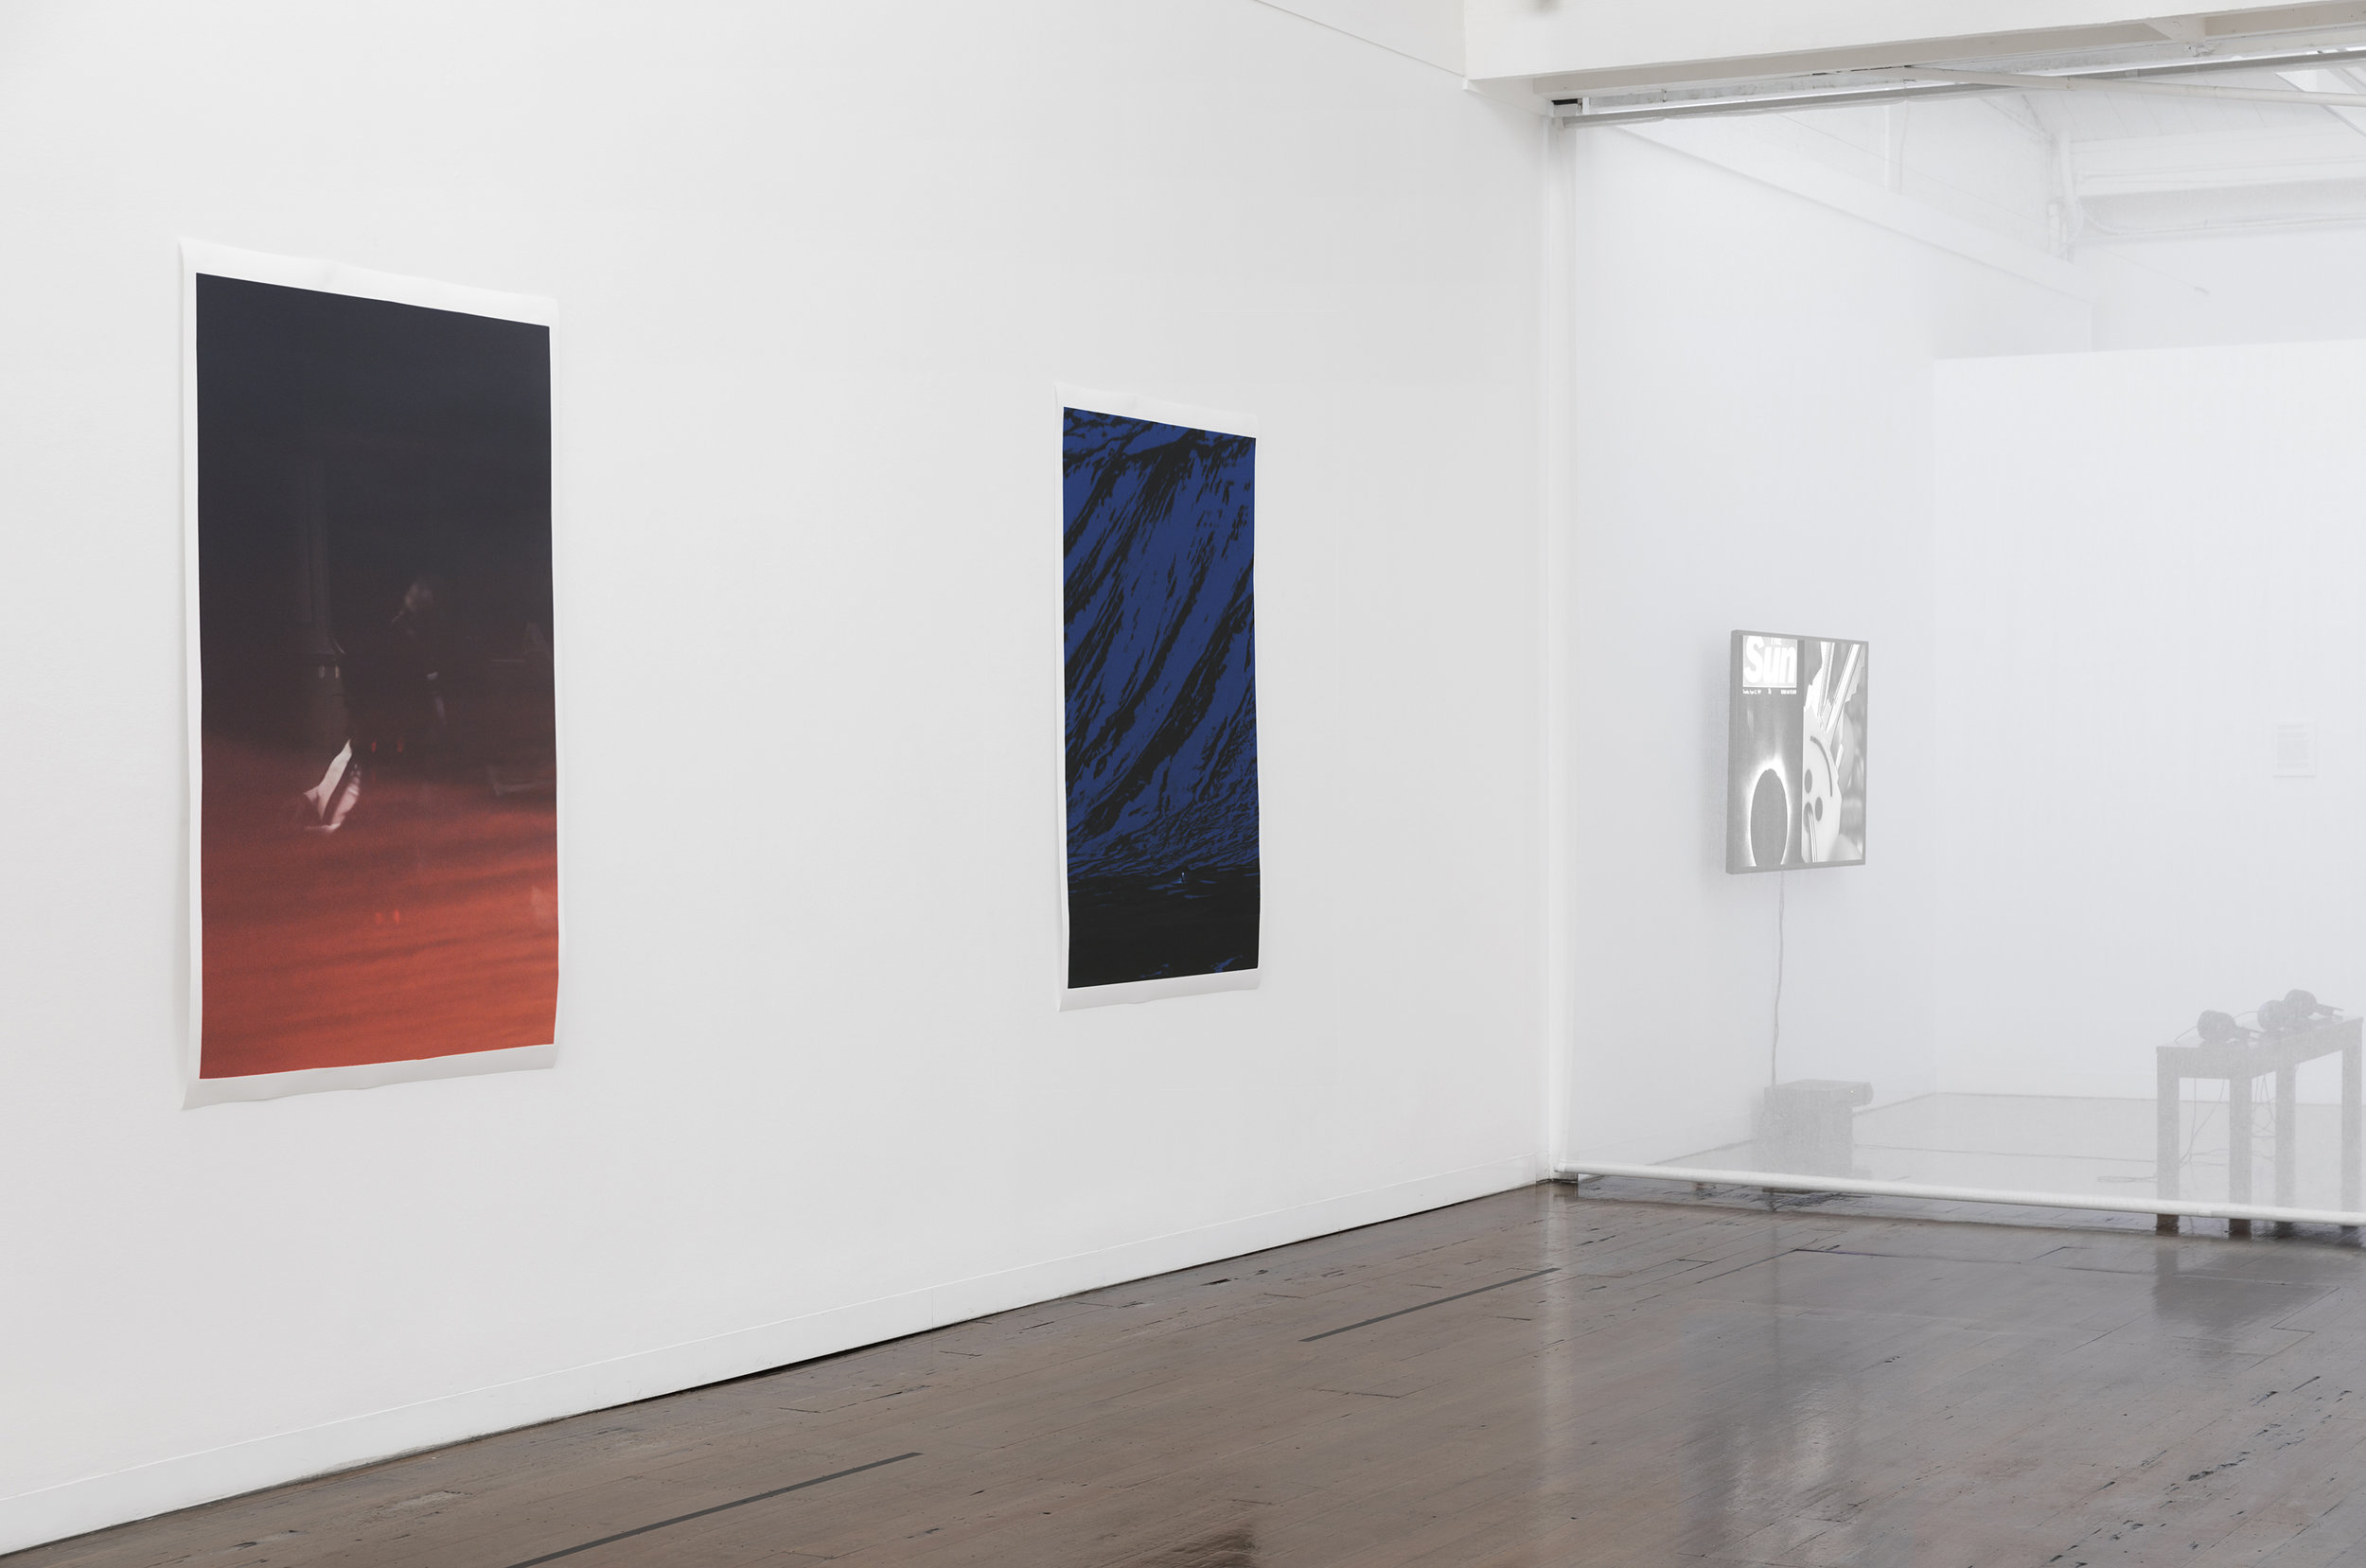  Installation view of “the sacredness of something” at Arc One Gallery, Melbourne (2019) 